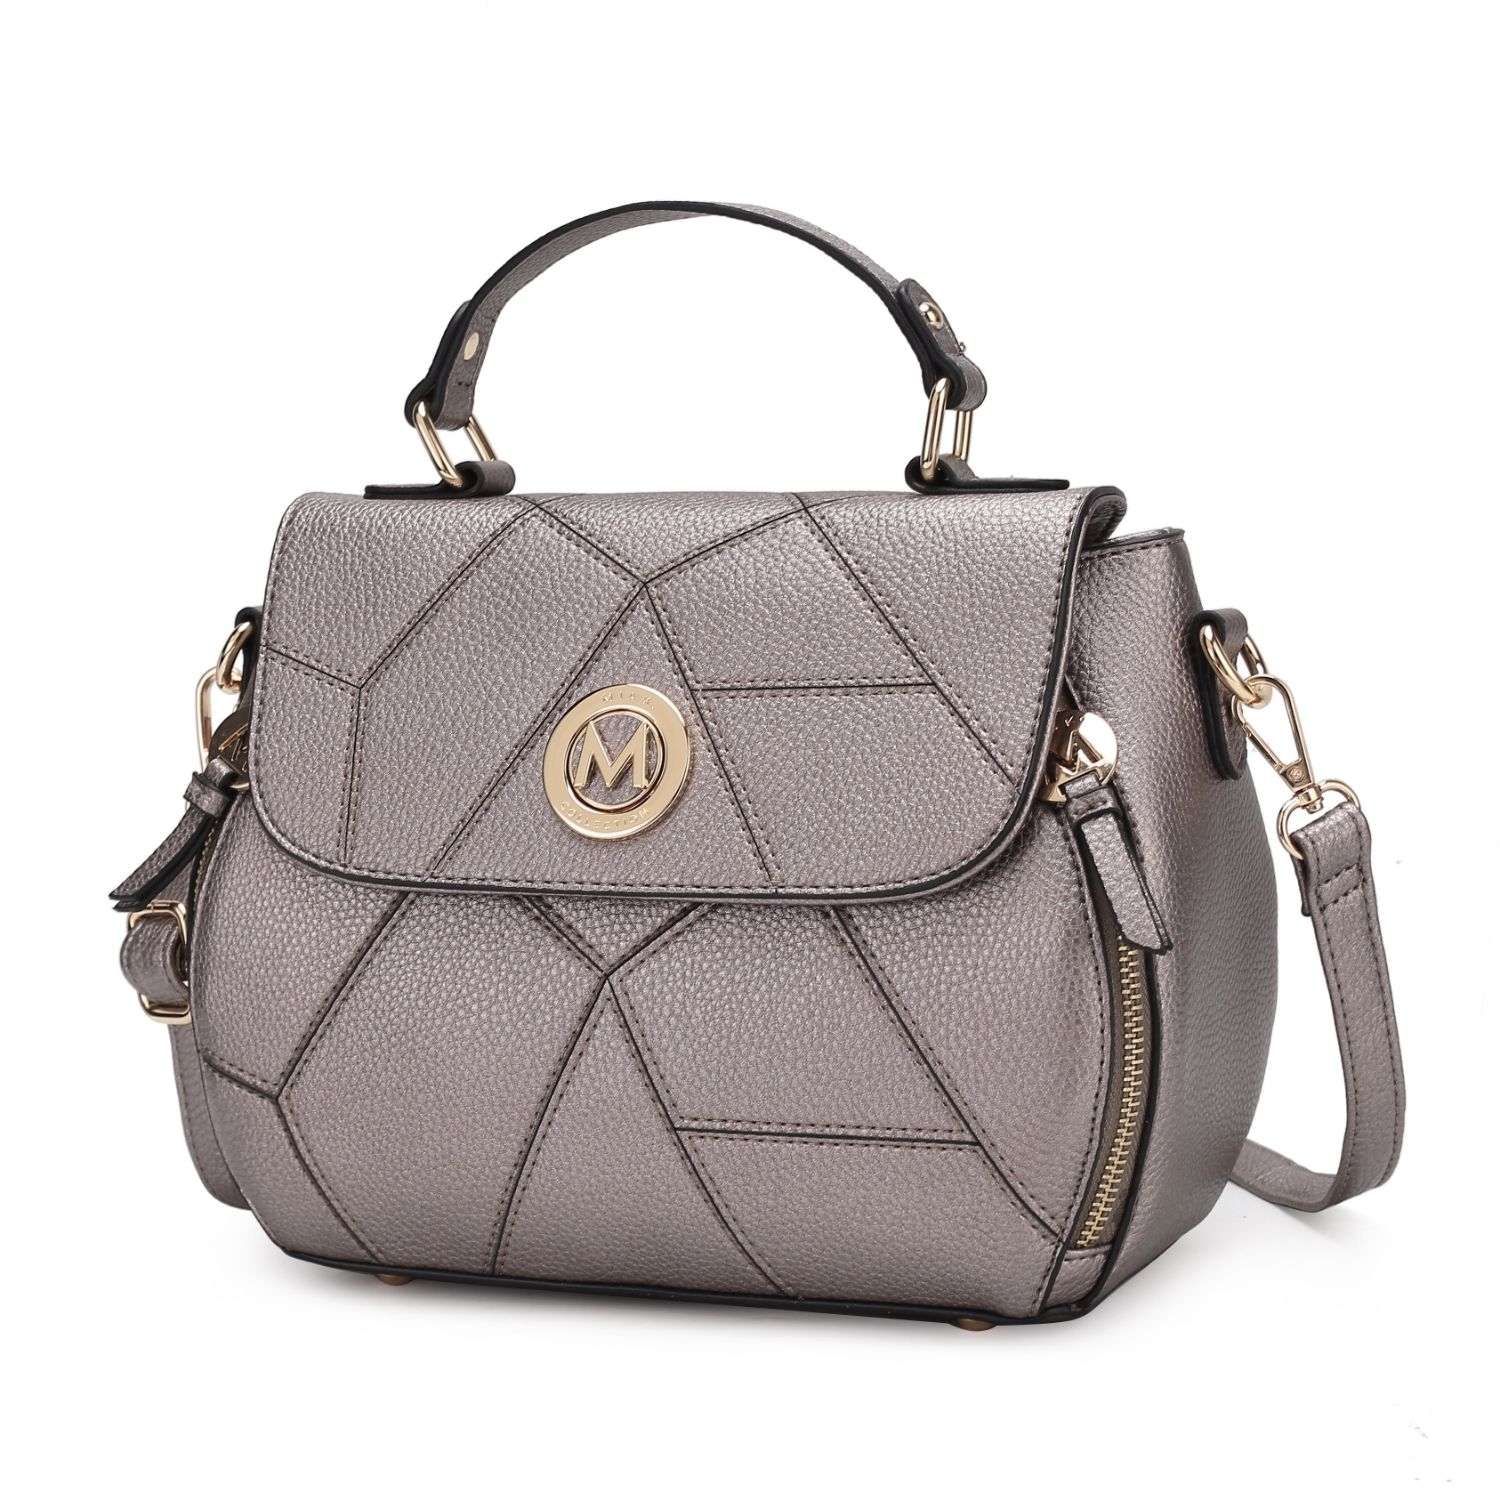 MKF Collection Clementine Vegan Leather Women's Satchel Bag By Mia K - Pewter